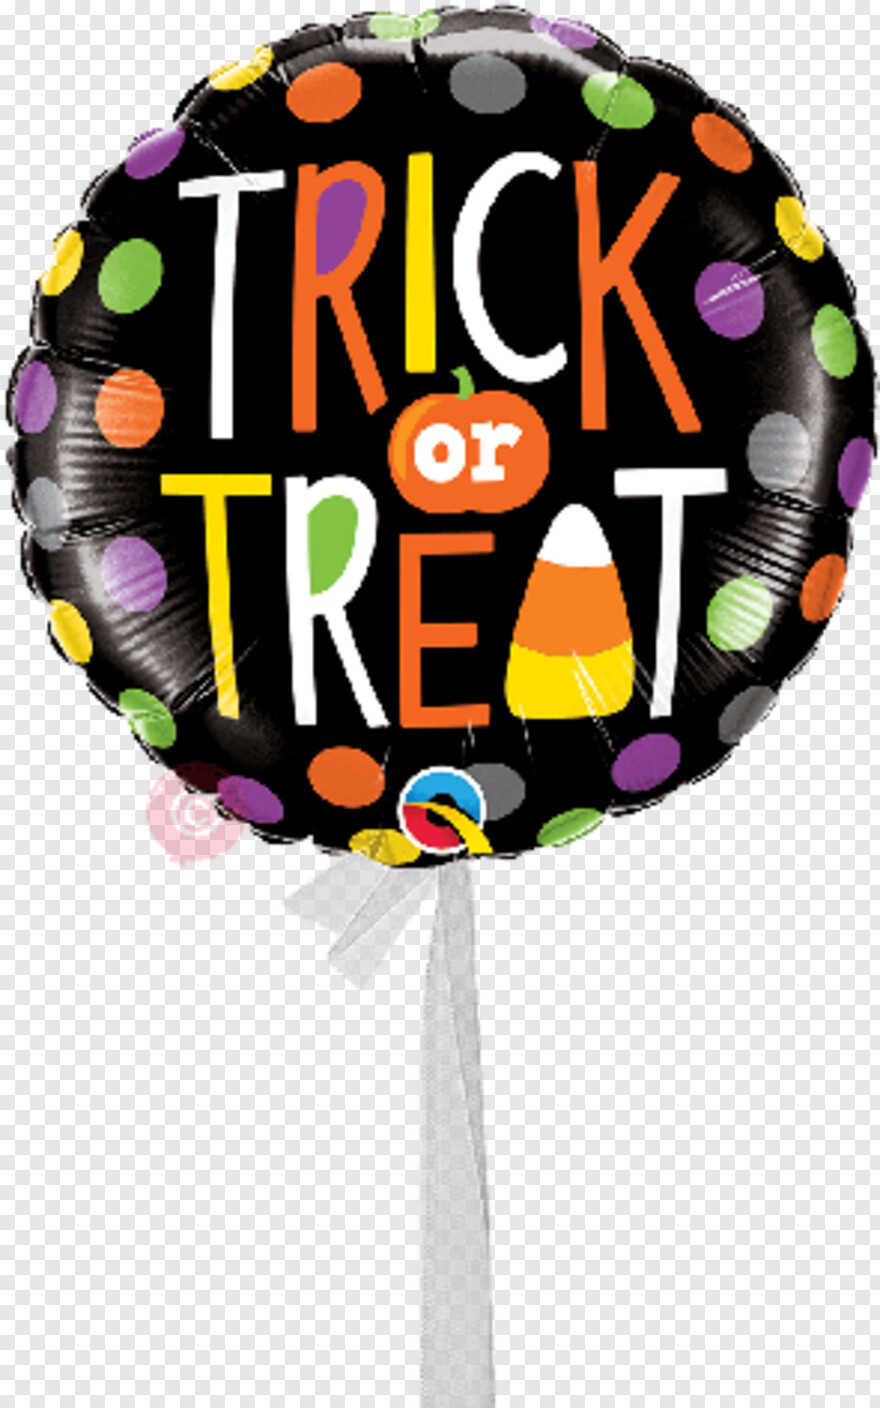 trick-or-treat # 522706